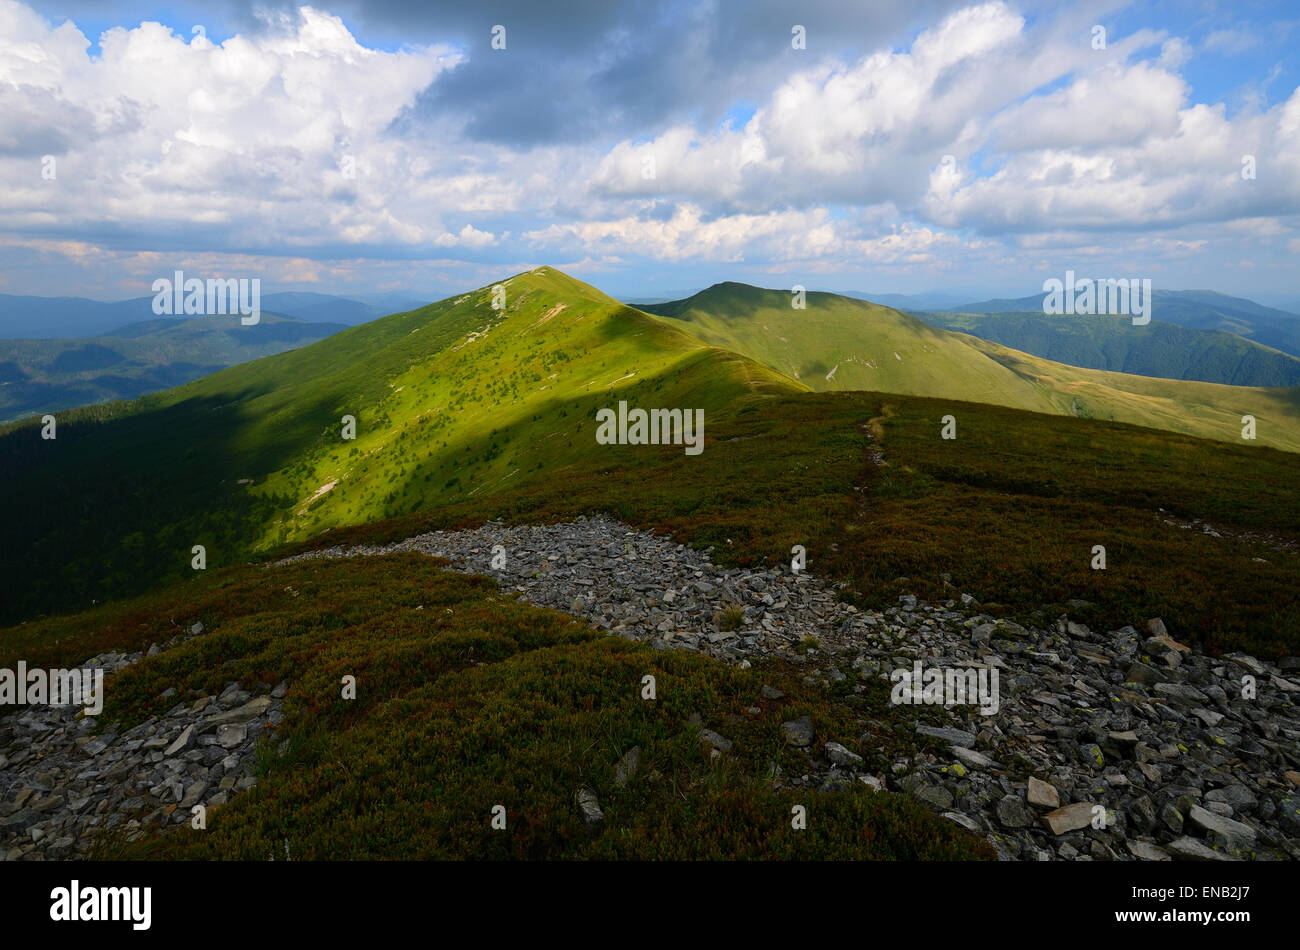 Mountain range with green grassy hills and light patches and rocks on the foreground Stock Photo